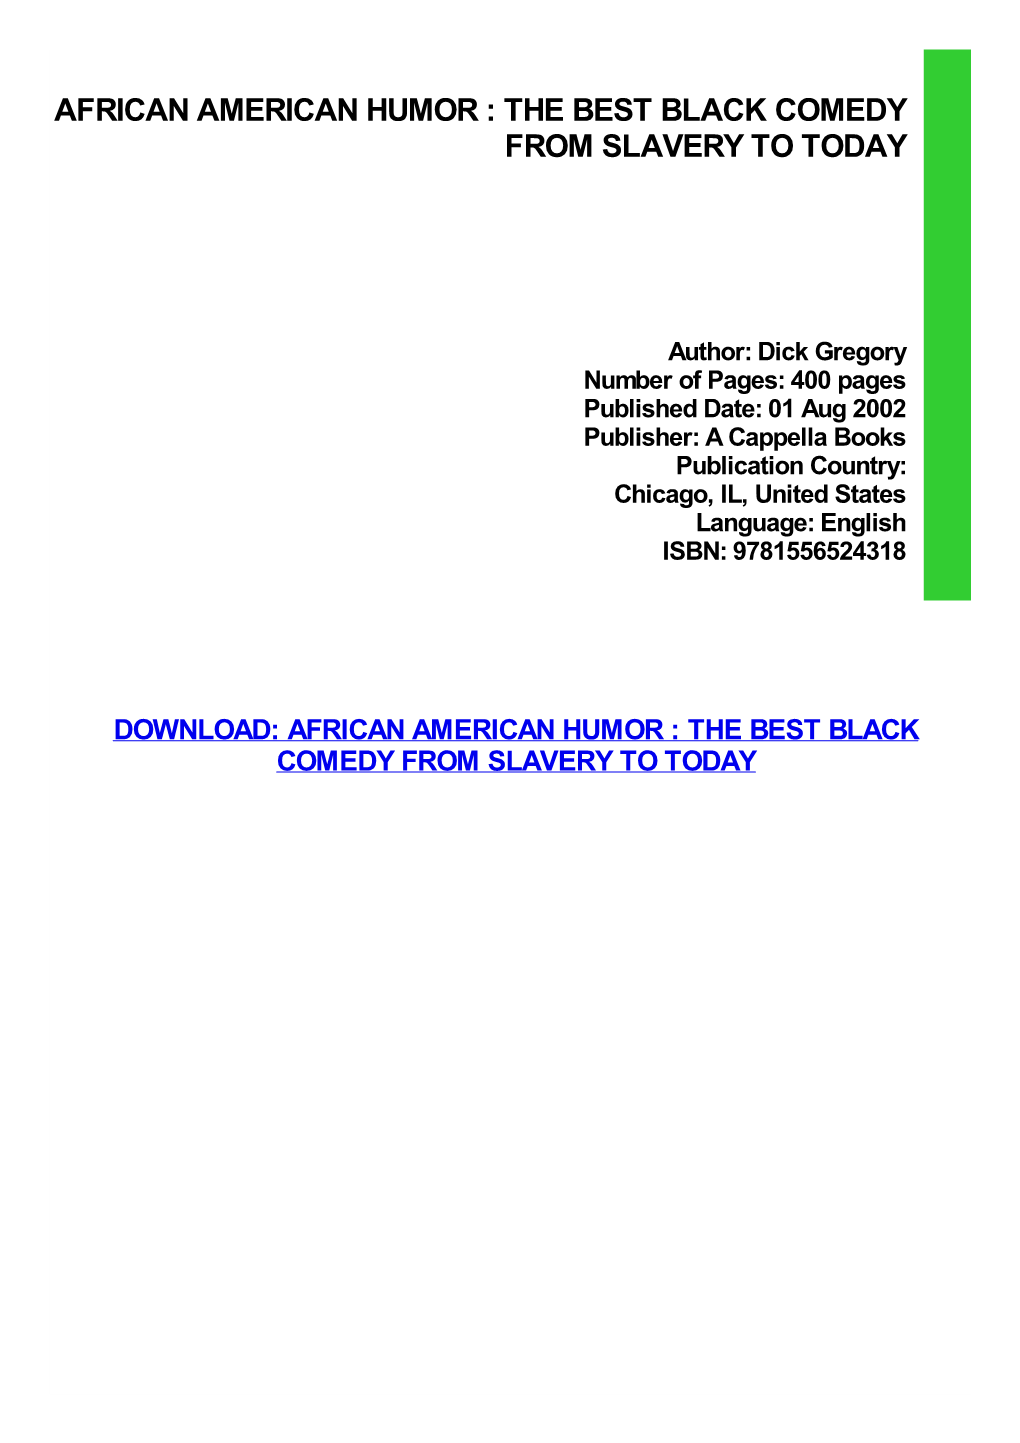 African American Humor : the Best Black Comedy from Slavery to Today